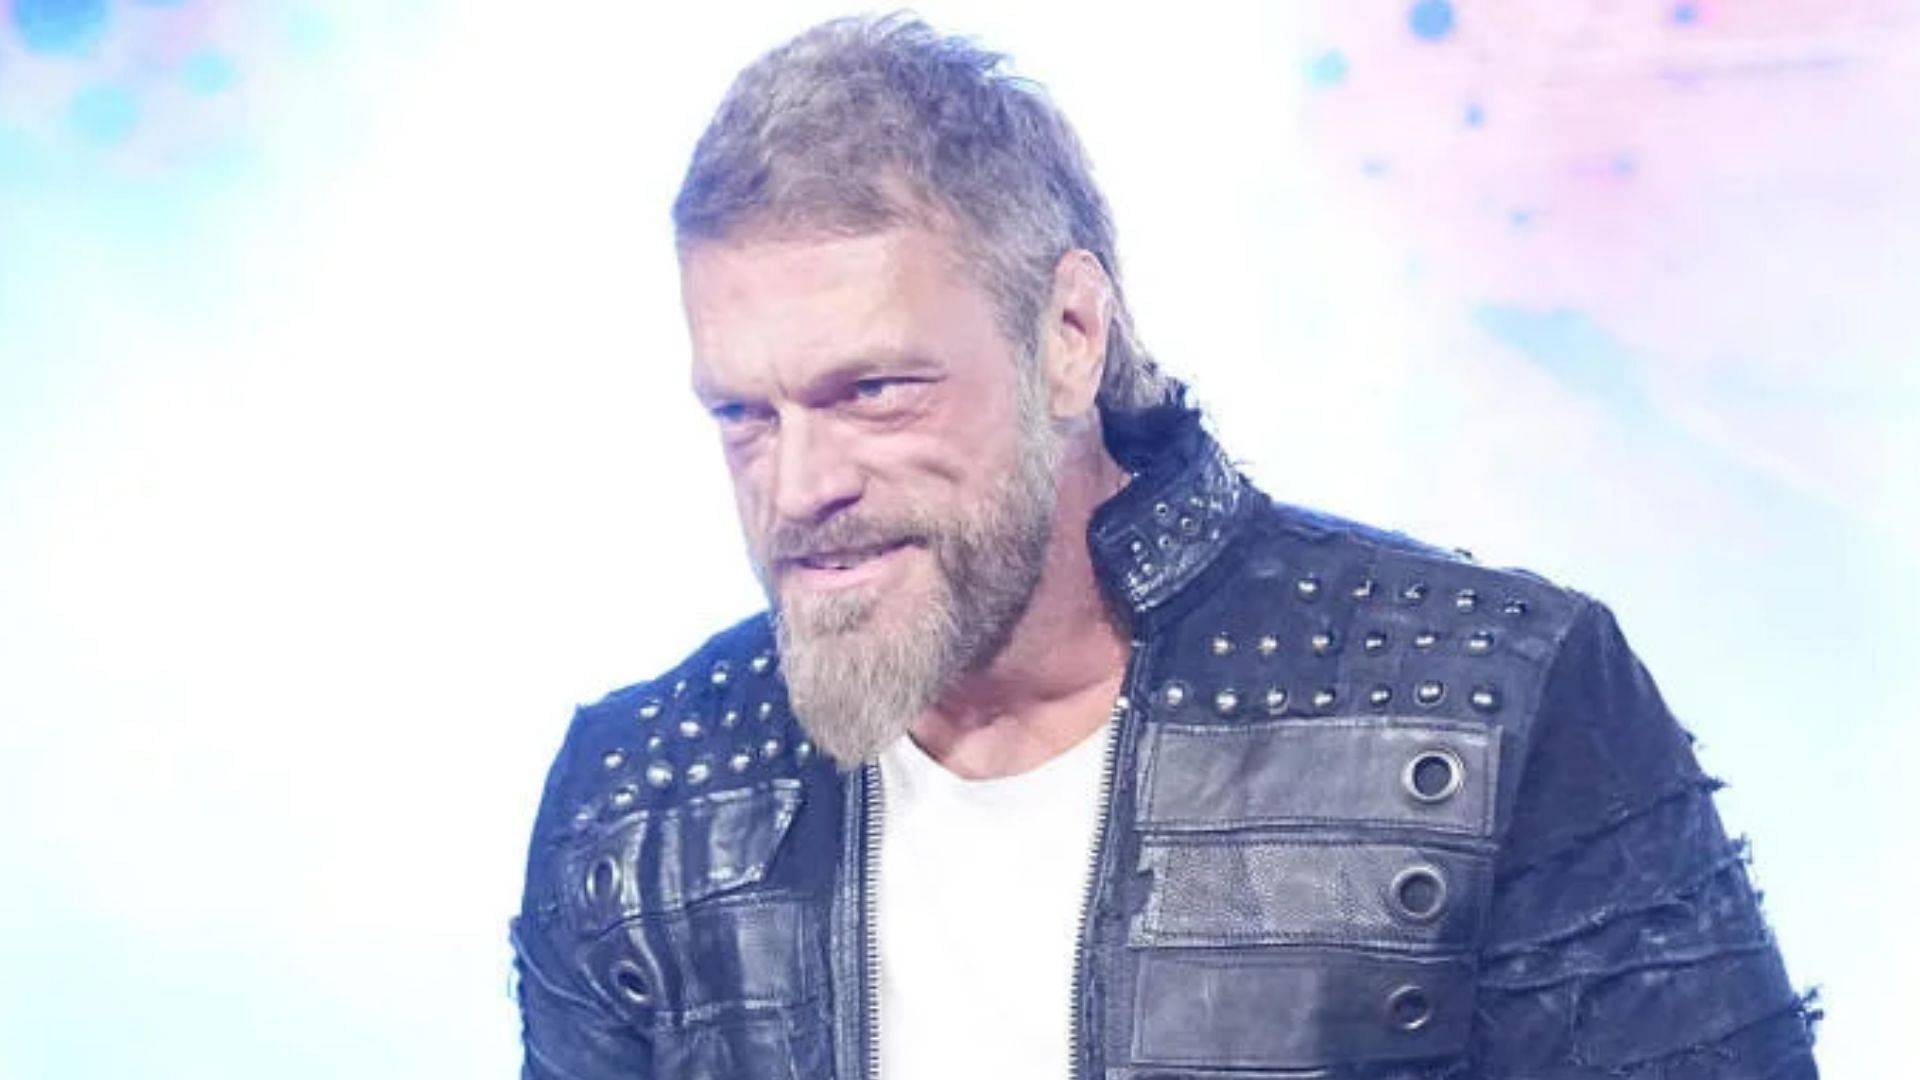 Edge was inducted in WWE Hall of Fame in 2012